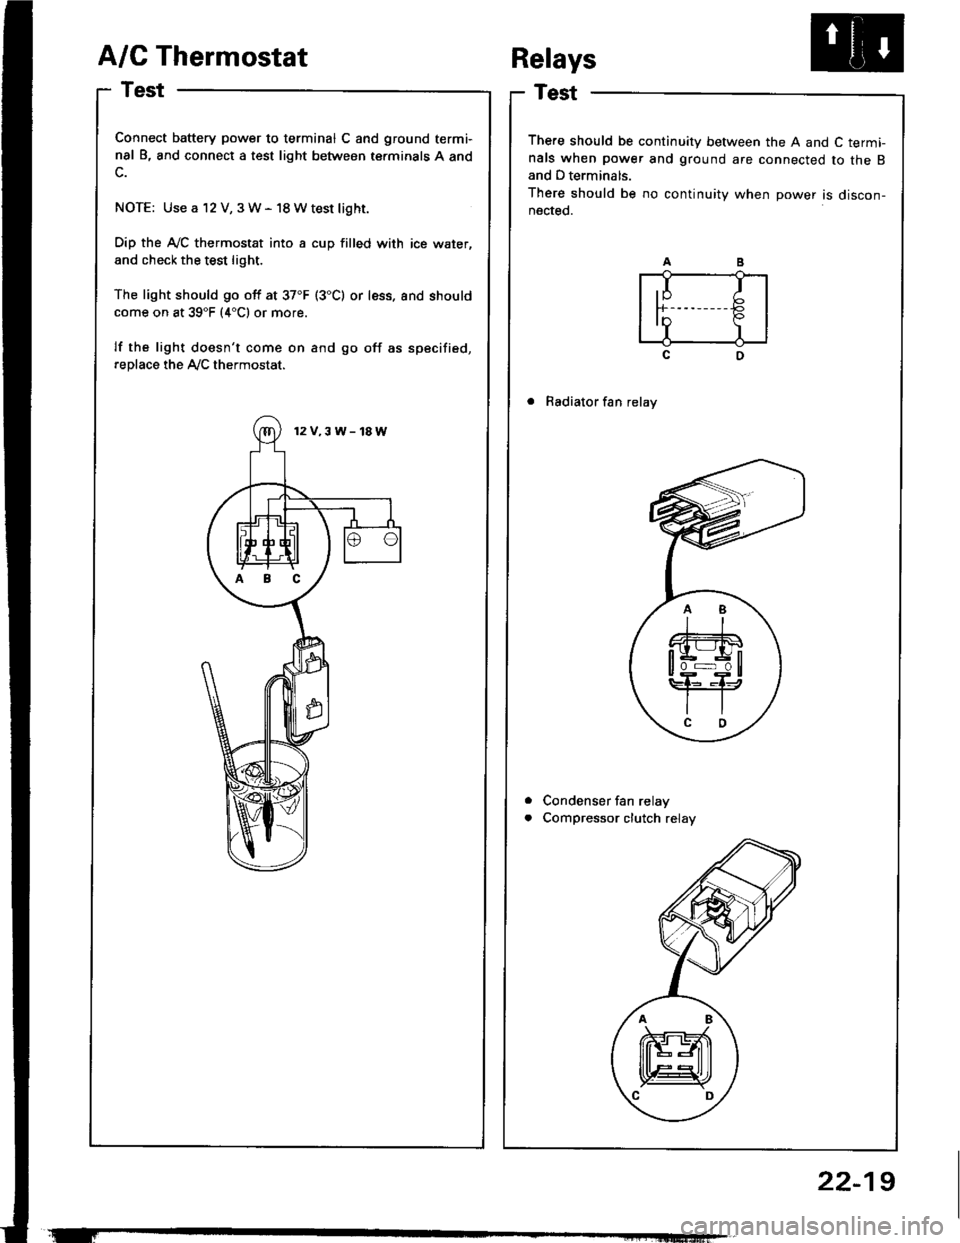 HONDA INTEGRA 1994 4.G Service Manual A/C Thermostat
Test
Connect battery power to terminal C and ground termi-
nal B, and connect a test light between terminals A and
NOTE: Use a 12 V, 3W- 18Wtest light.
Dip the A-/C thermostat into a cu